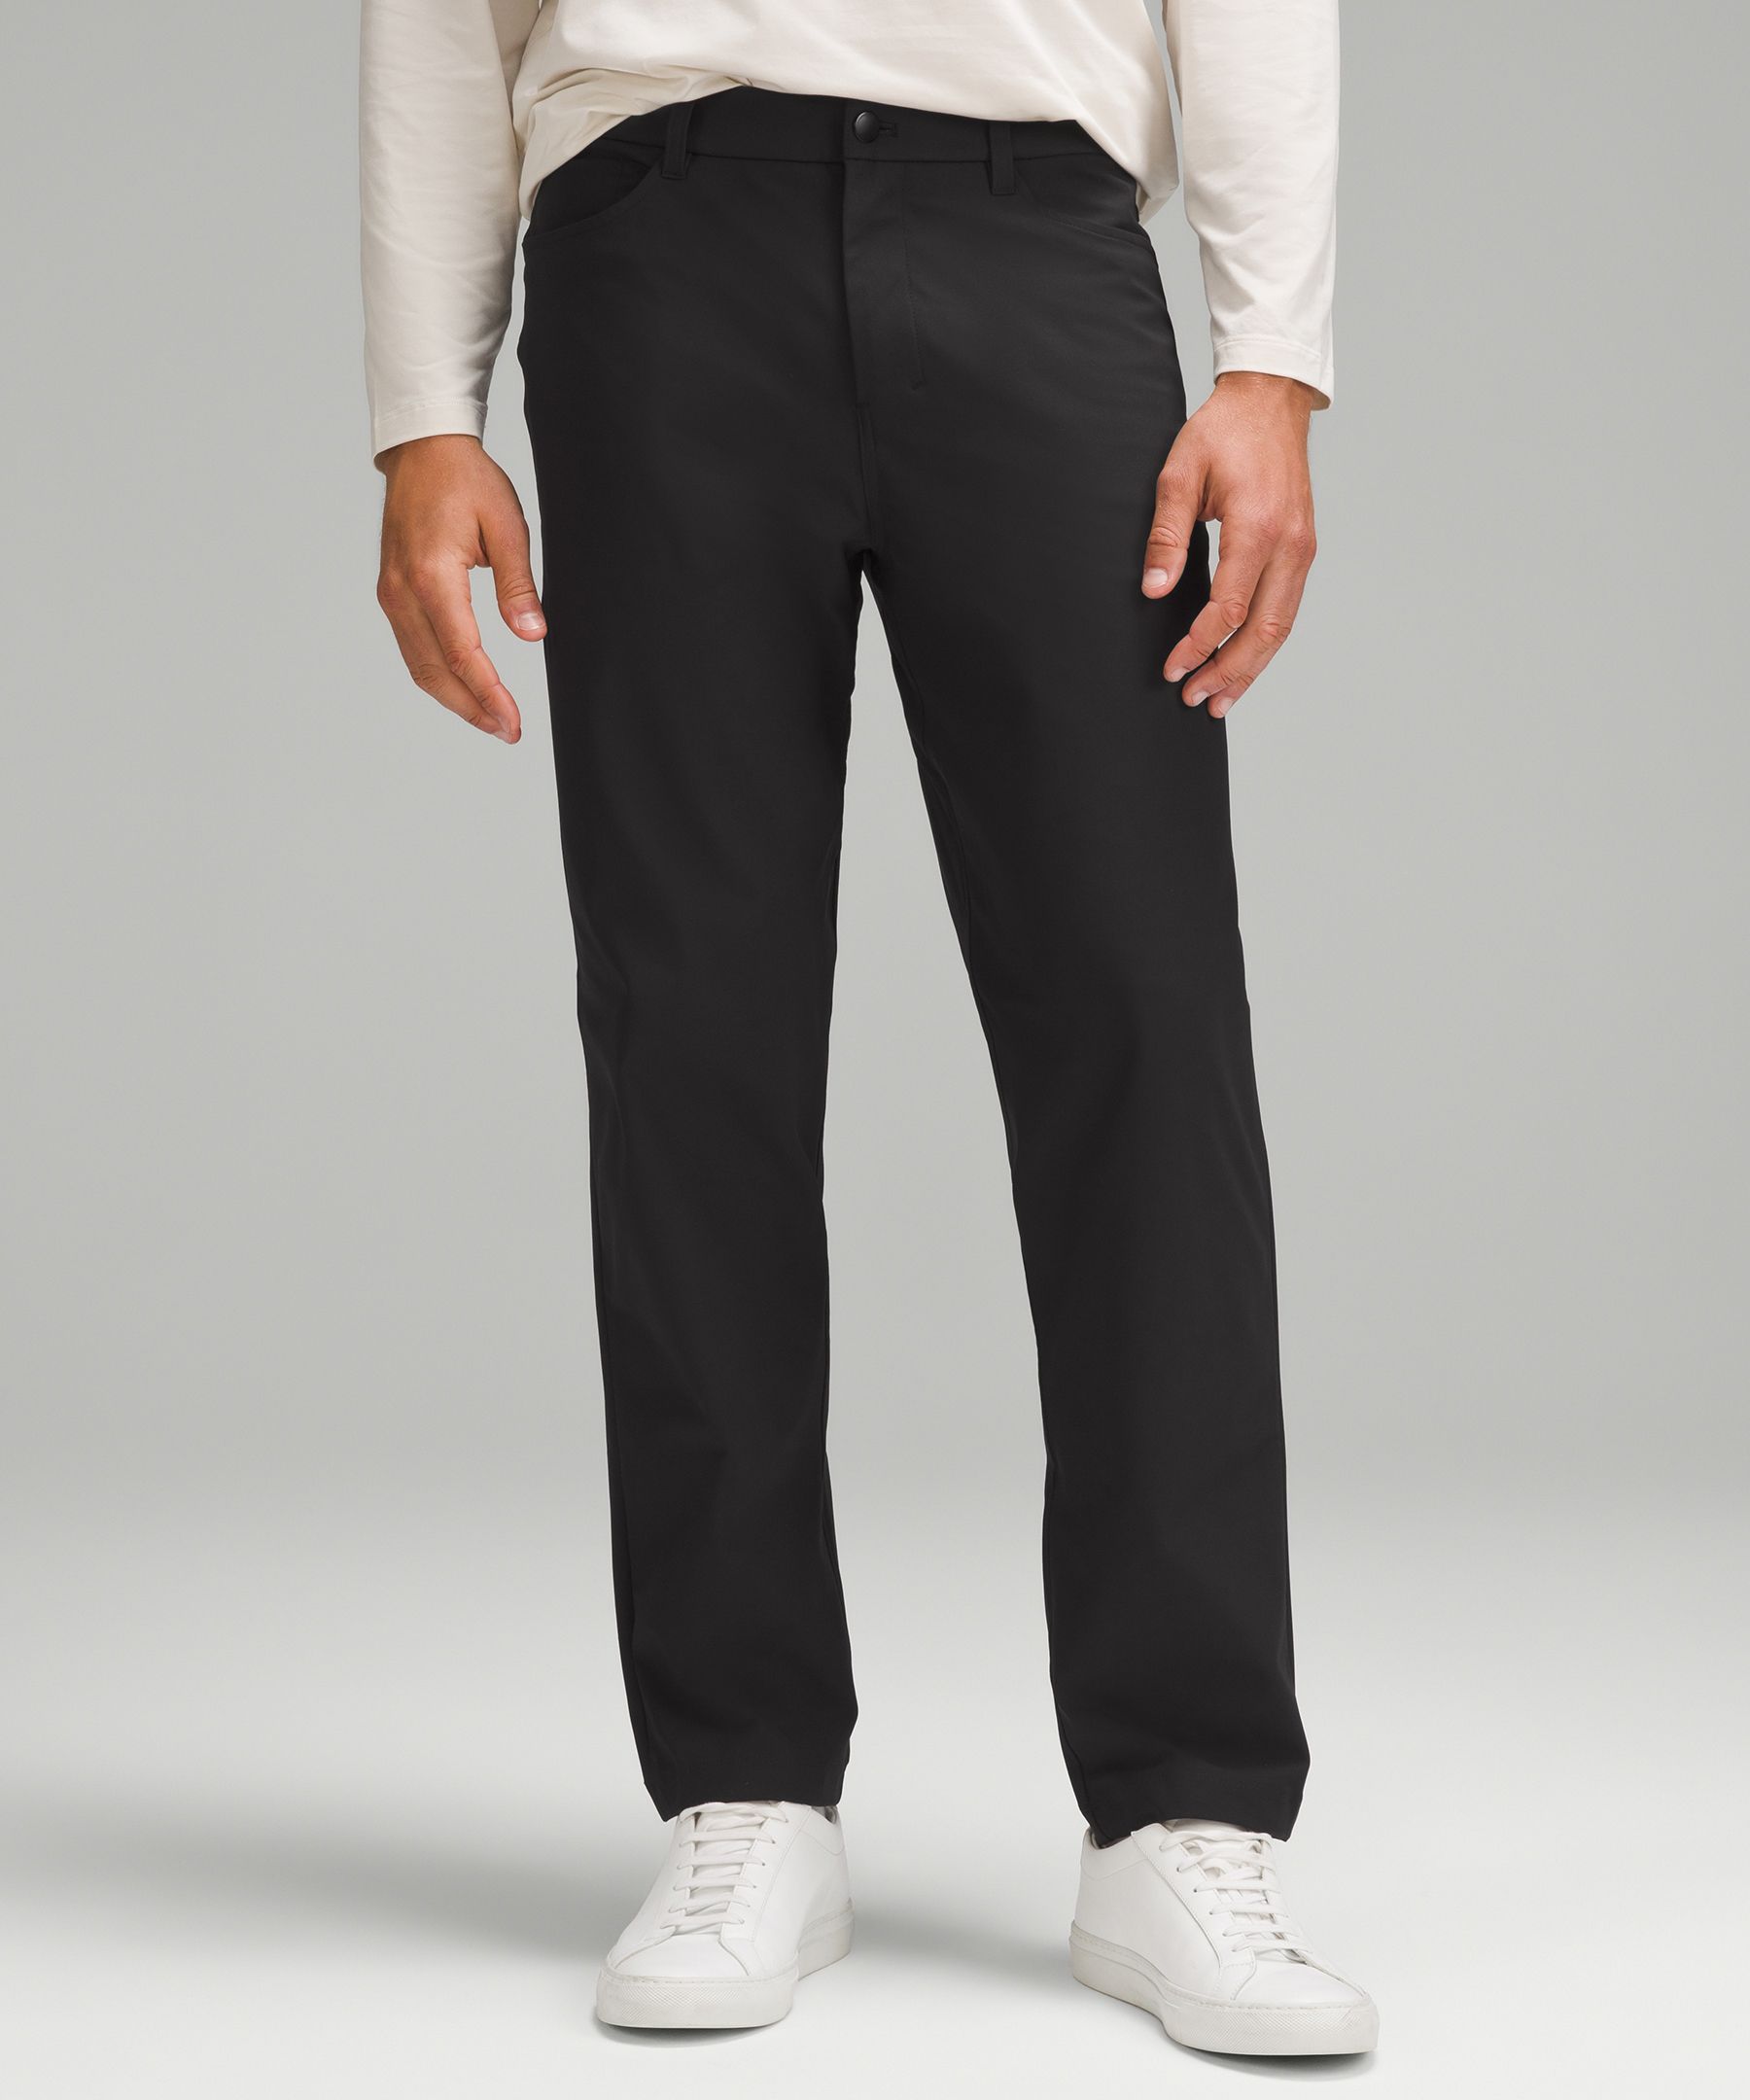 Men's ABC Trousers also known as Commission Pant